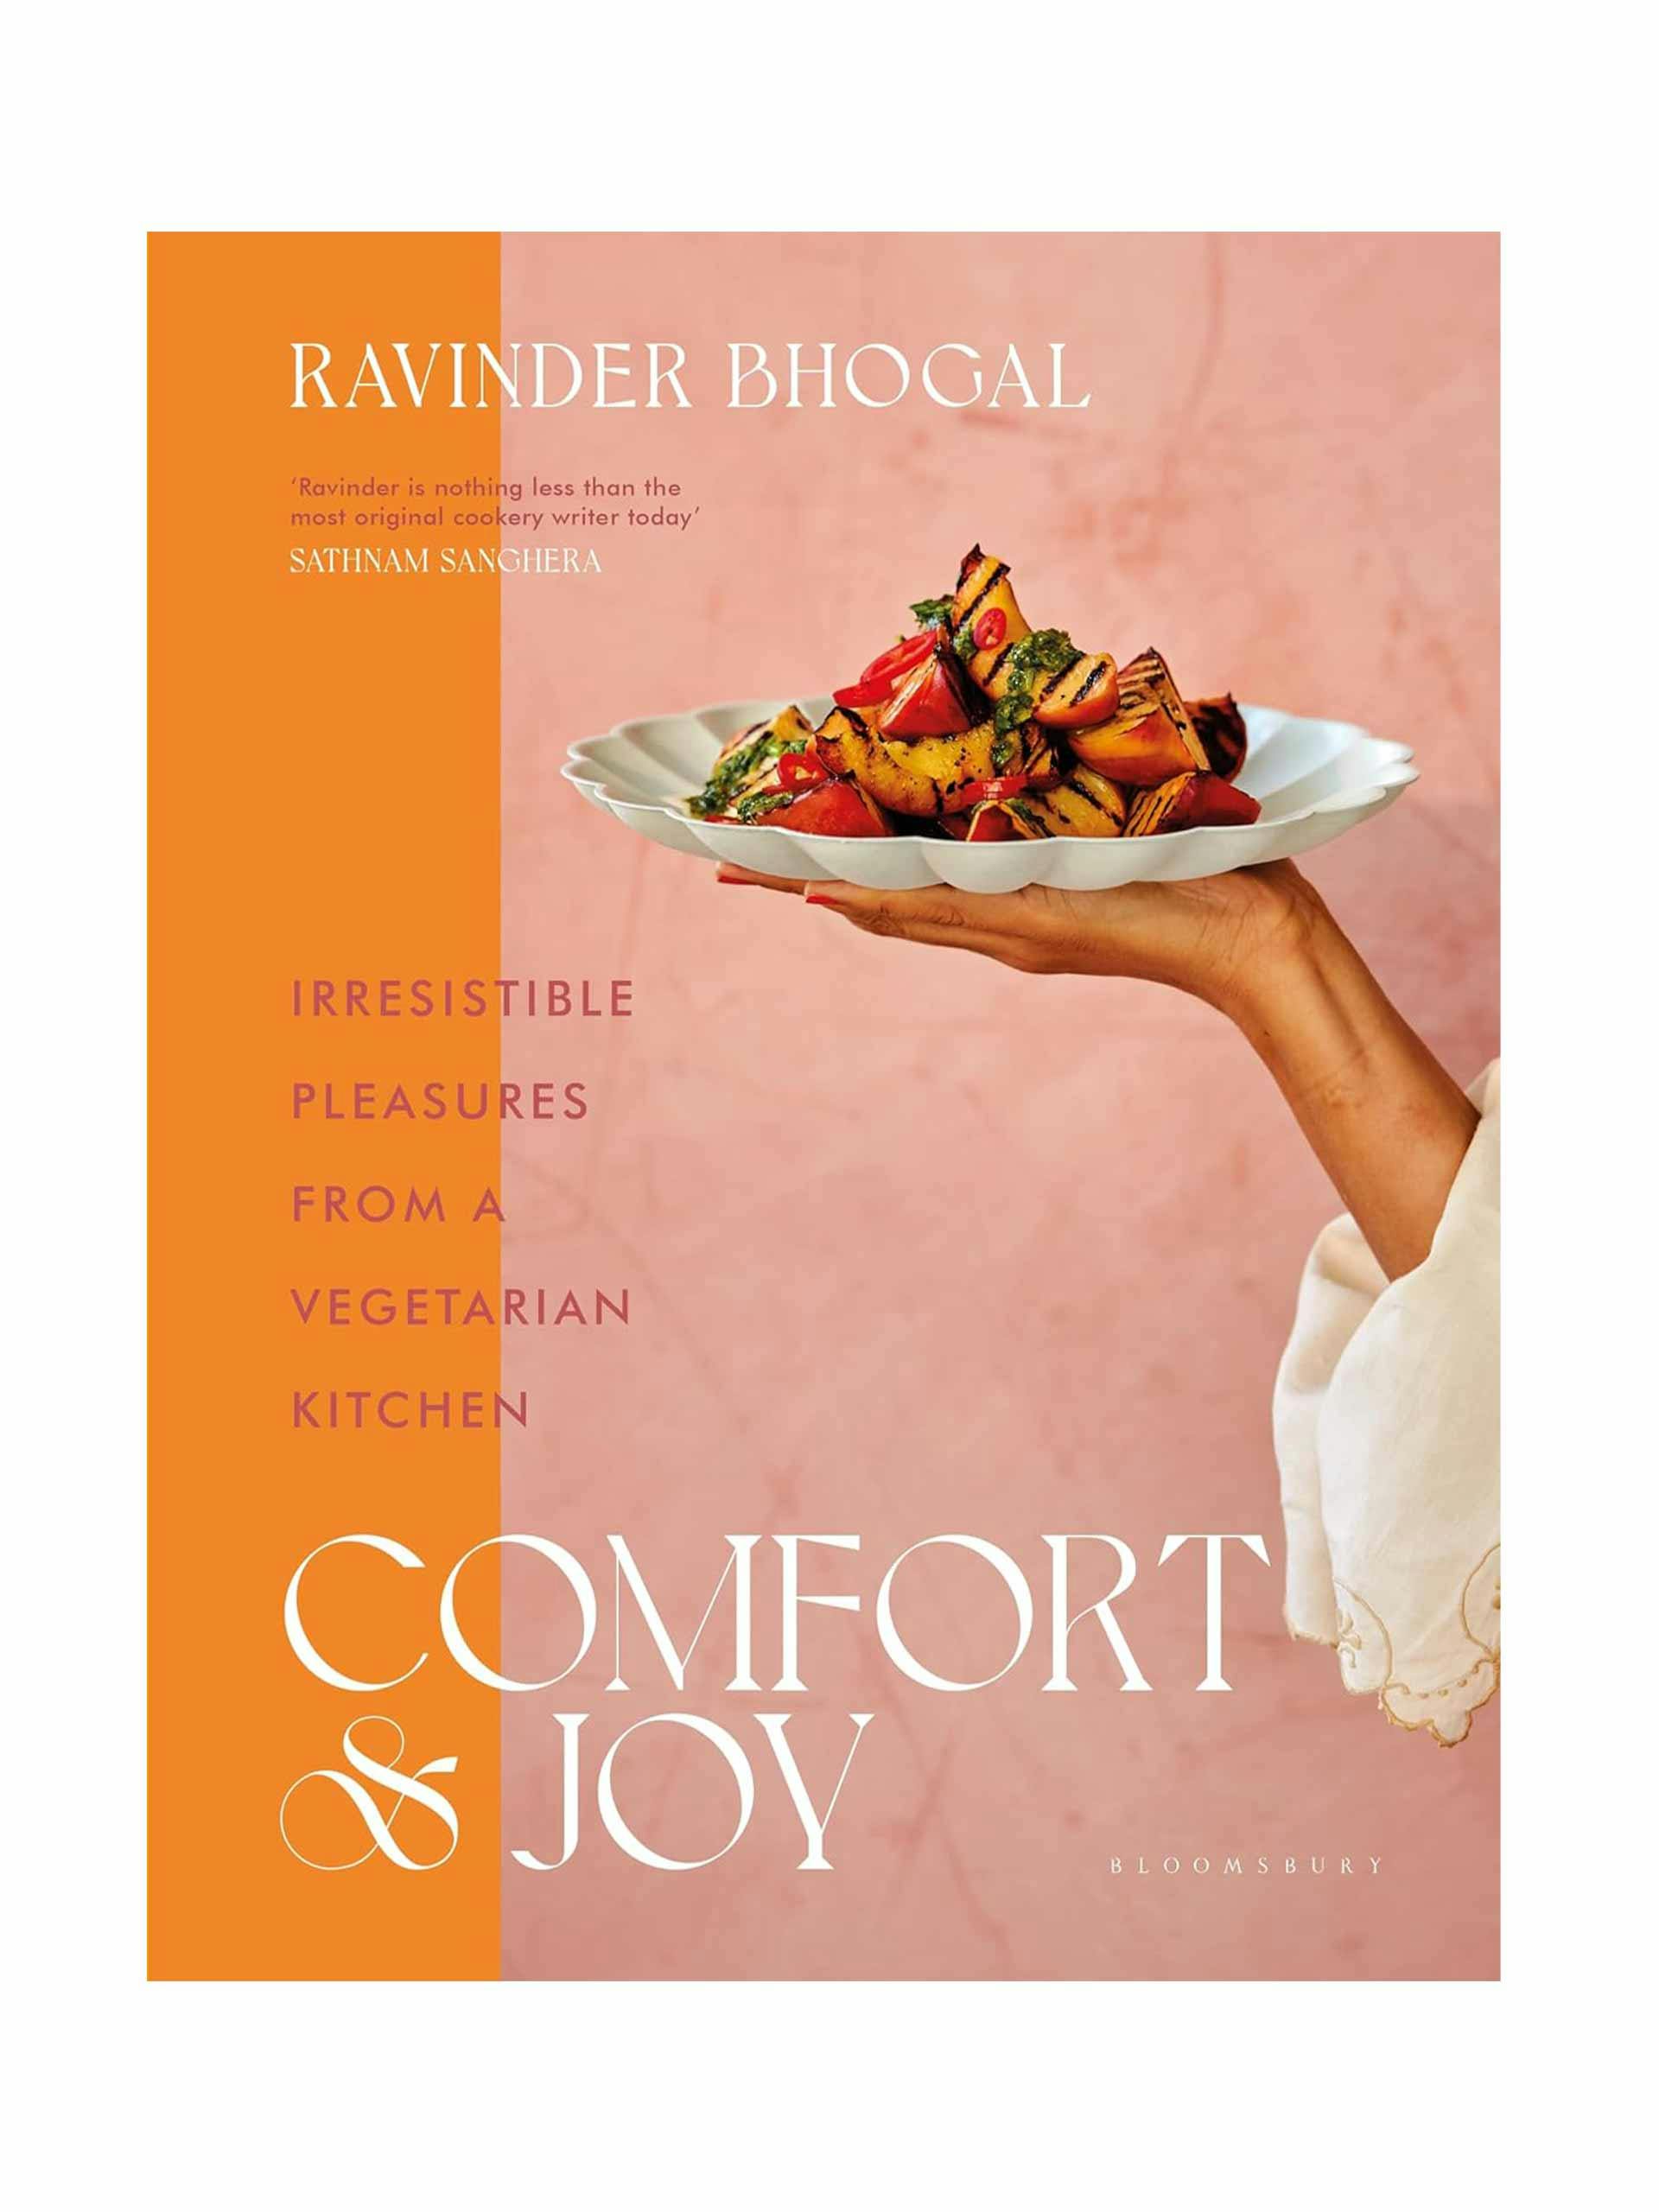 Comfort and Joy: Irresistible pleasures from a vegetarian kitchen